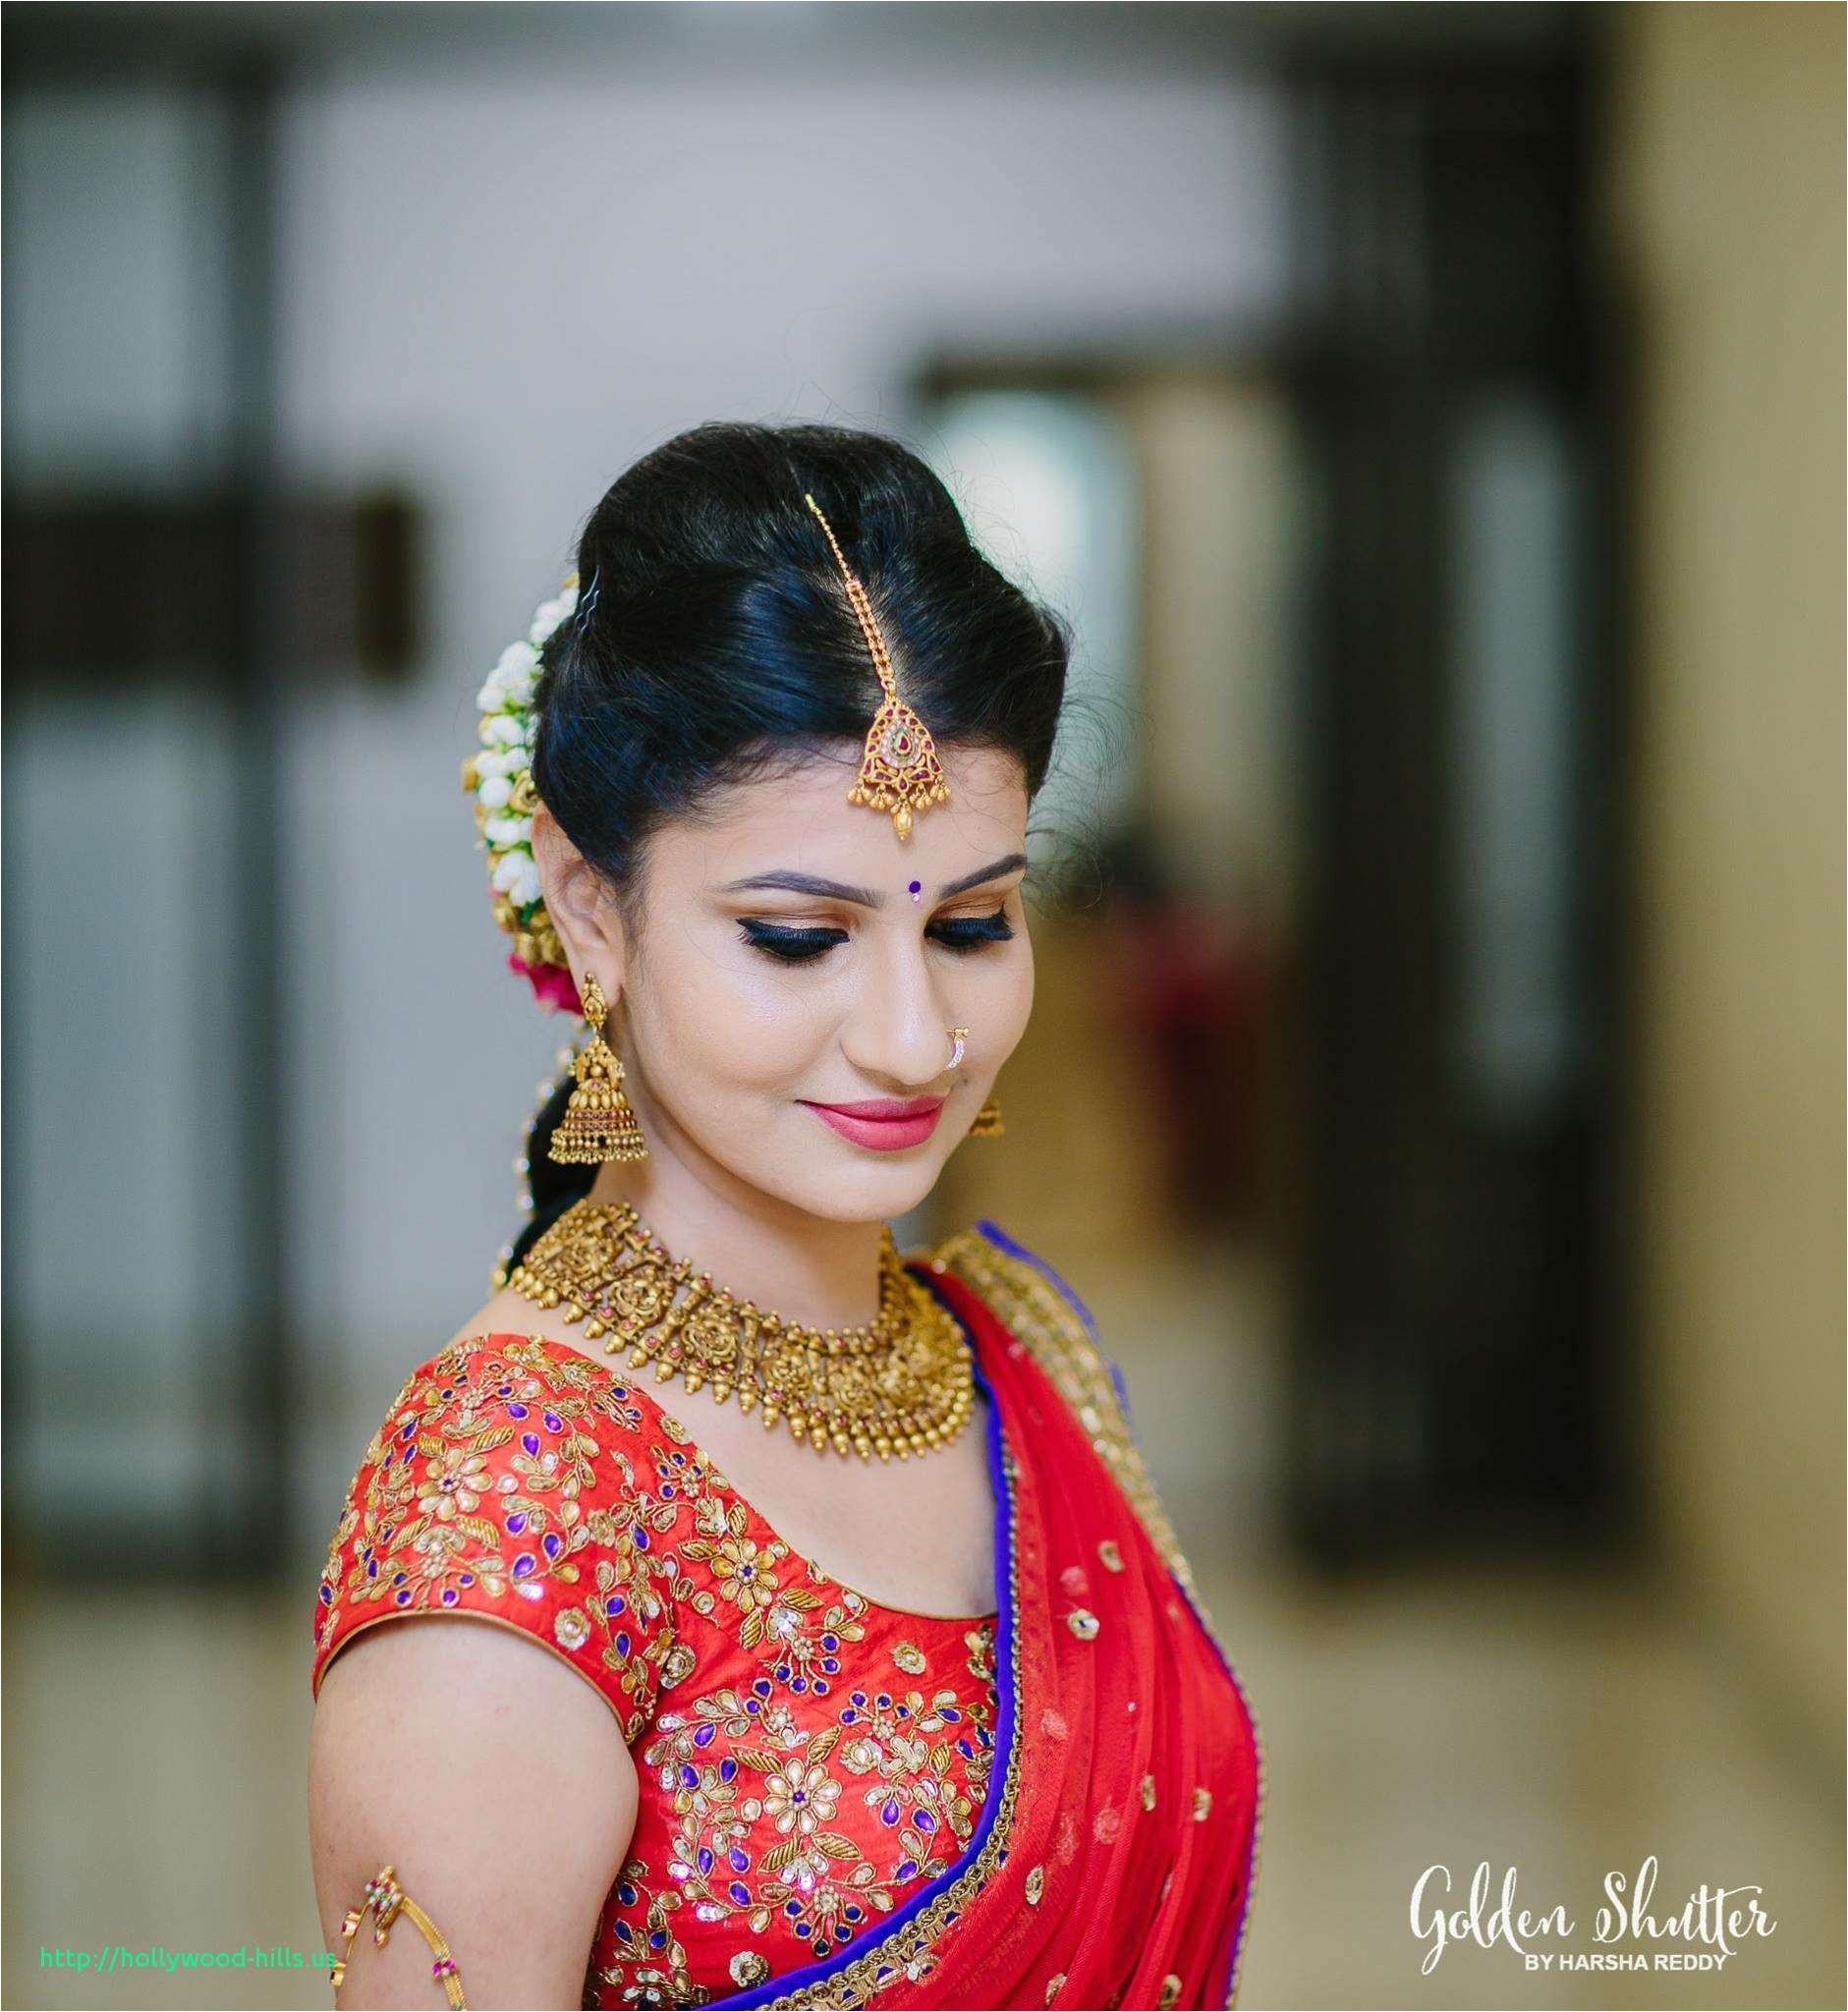 Best Hairstyle for Indian Wedding Reception Beautiful Wedding Reception Hairstyles Kerala